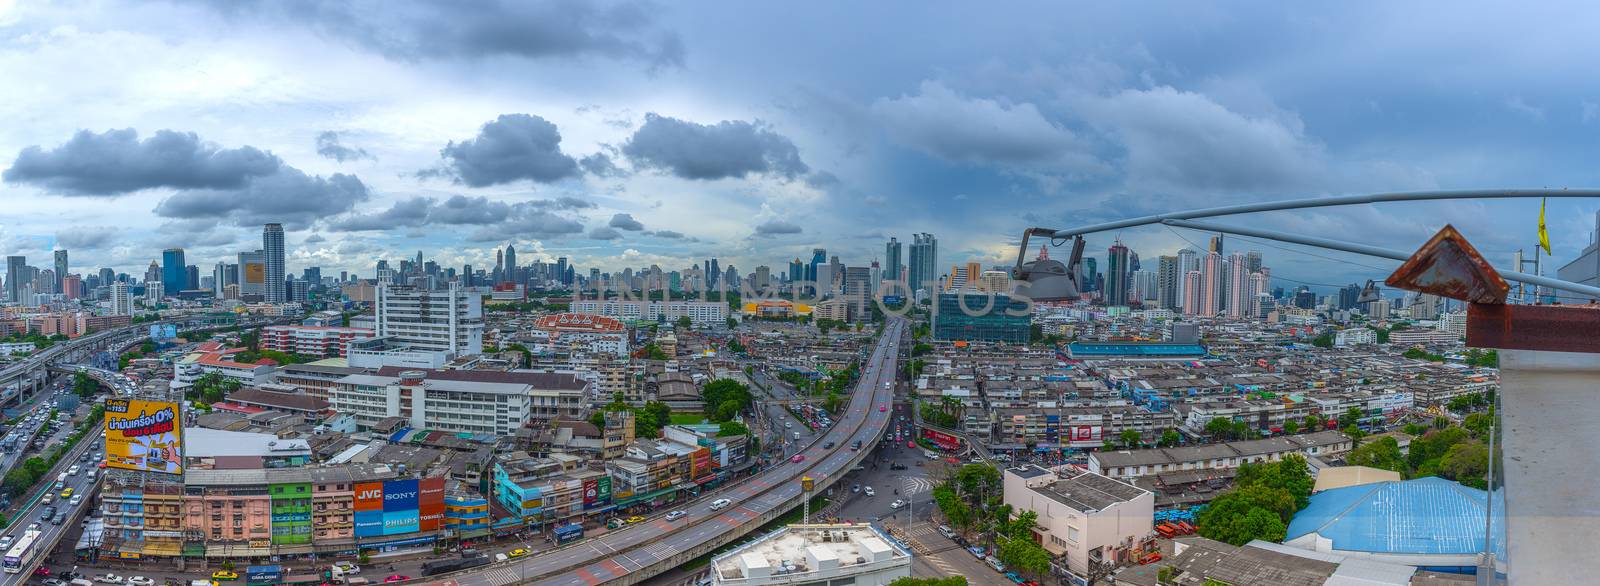 Cityscape and transportation in daytime, process in panorama HDR by PongMoji